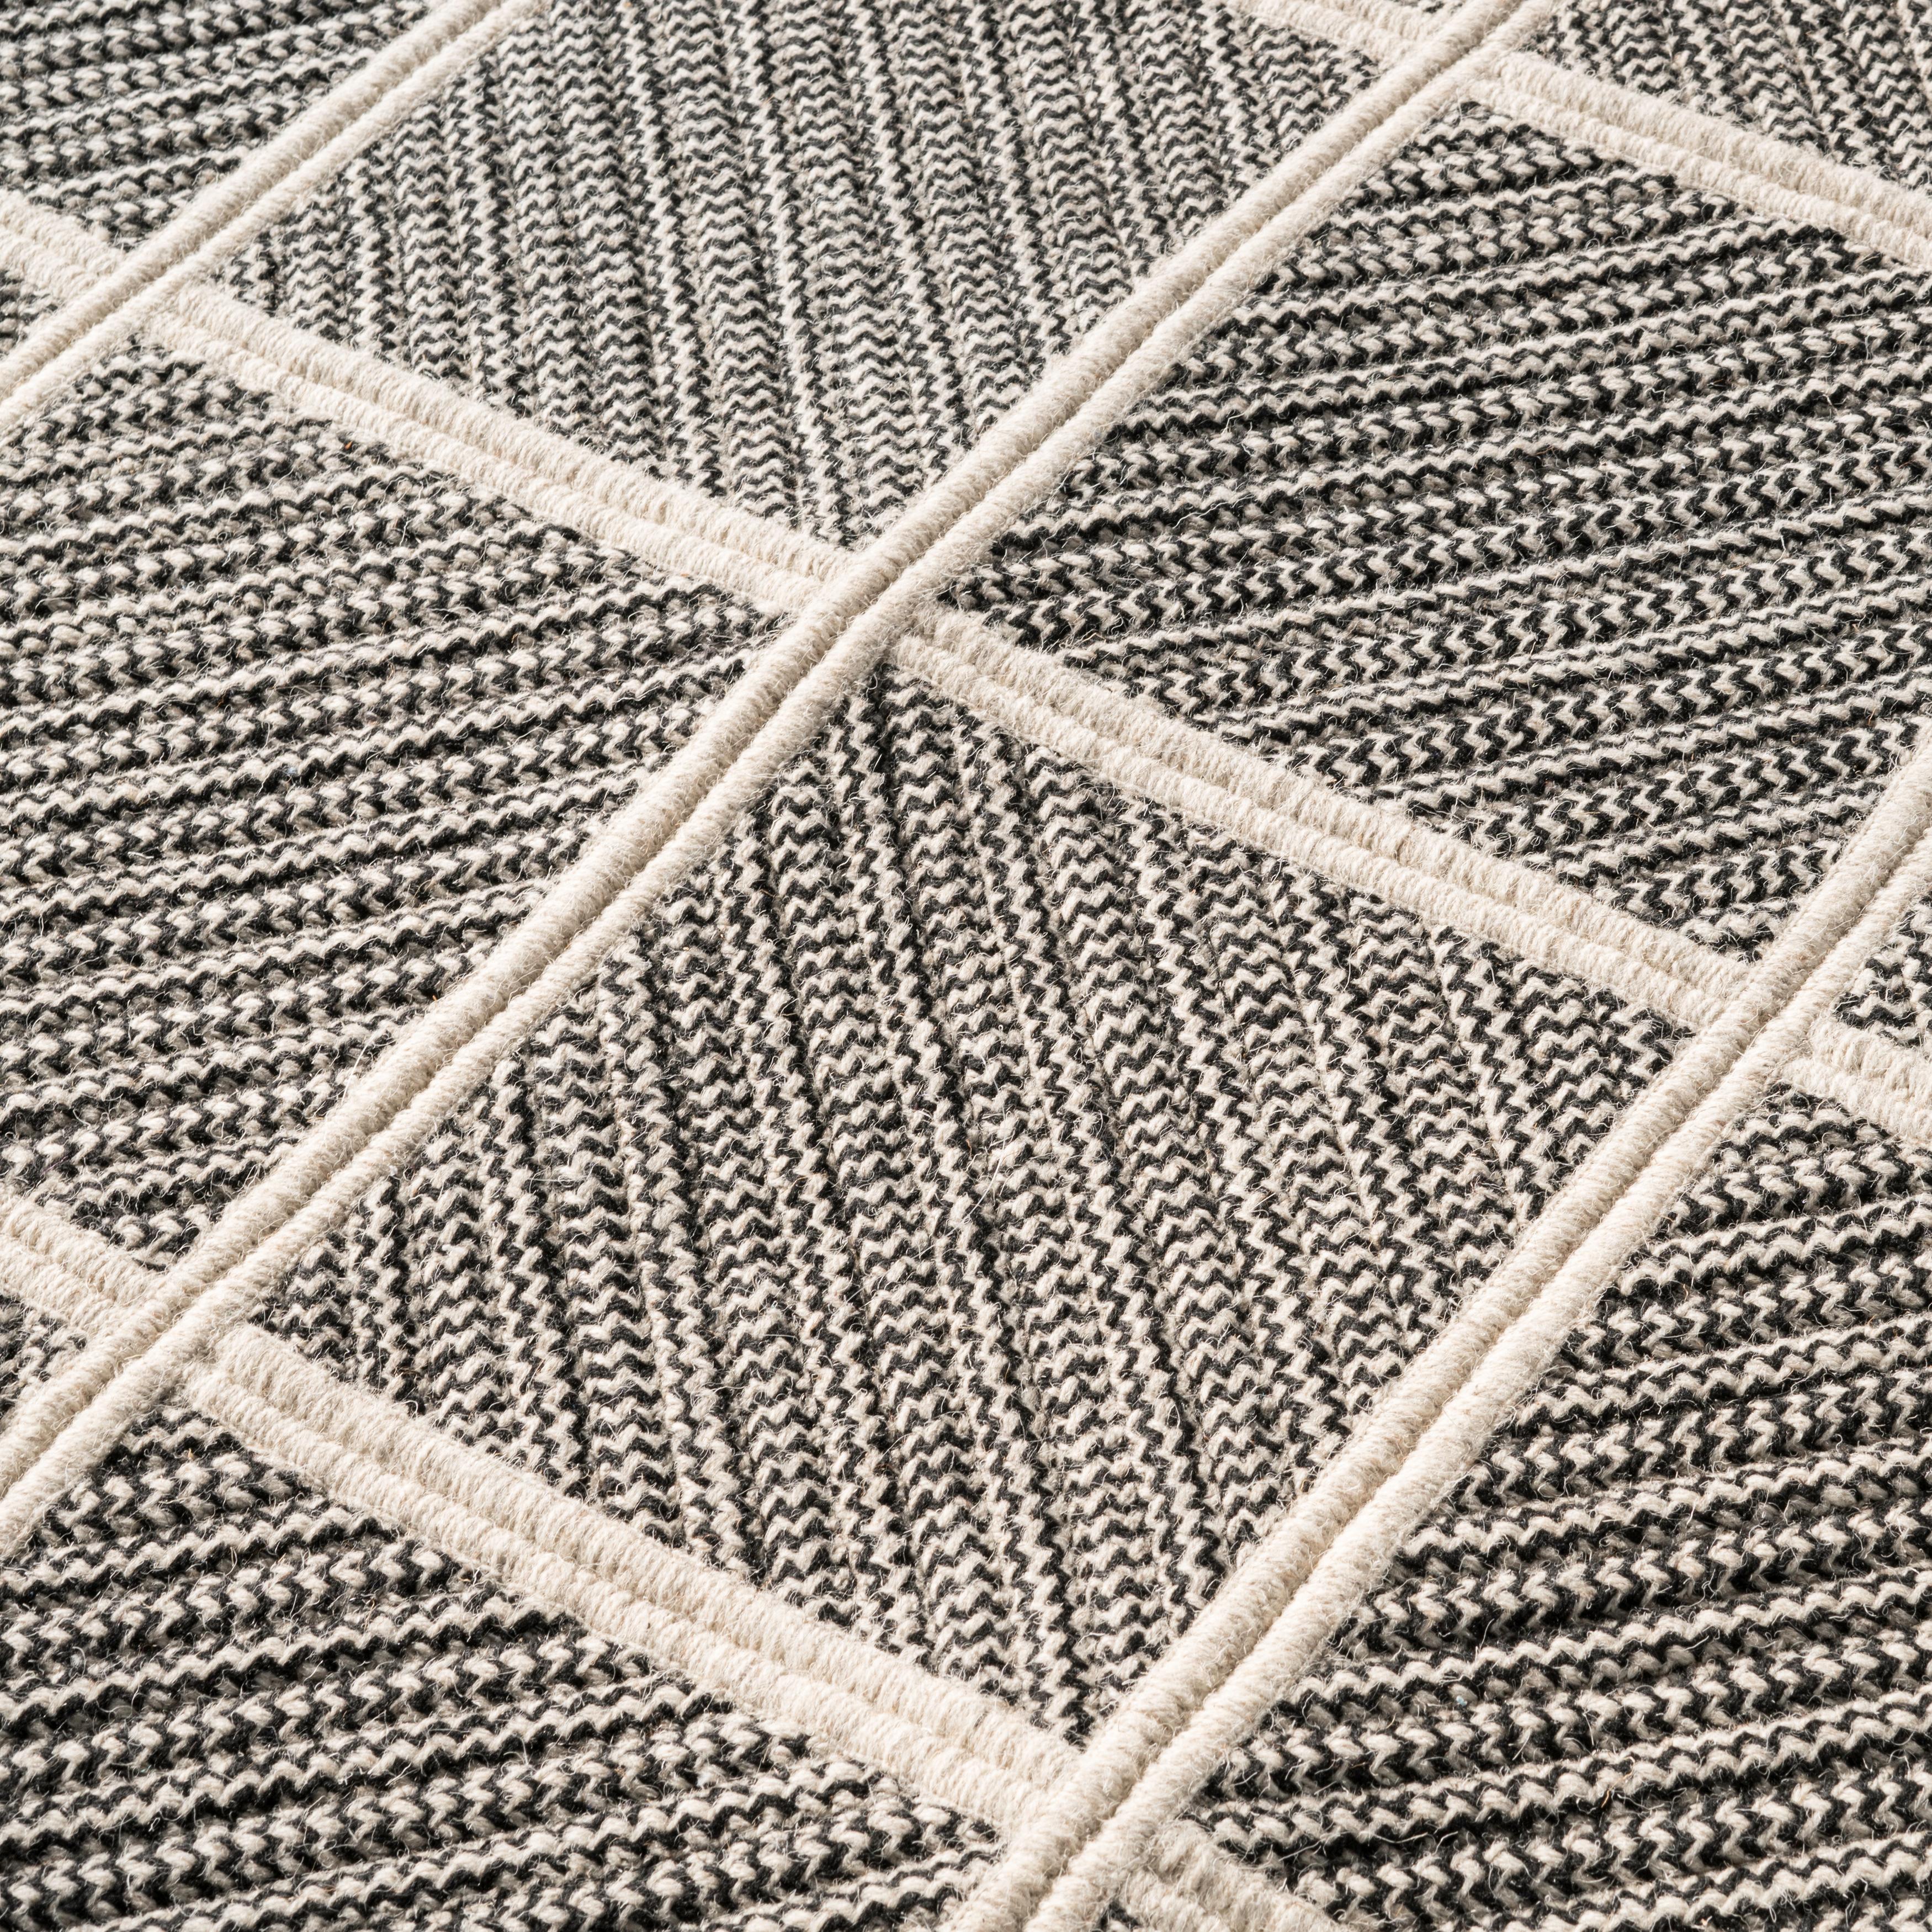 Modern Terrain Rug, Blue and Grey Braided Woven Wool, Custom Made in the USA, Round For Sale